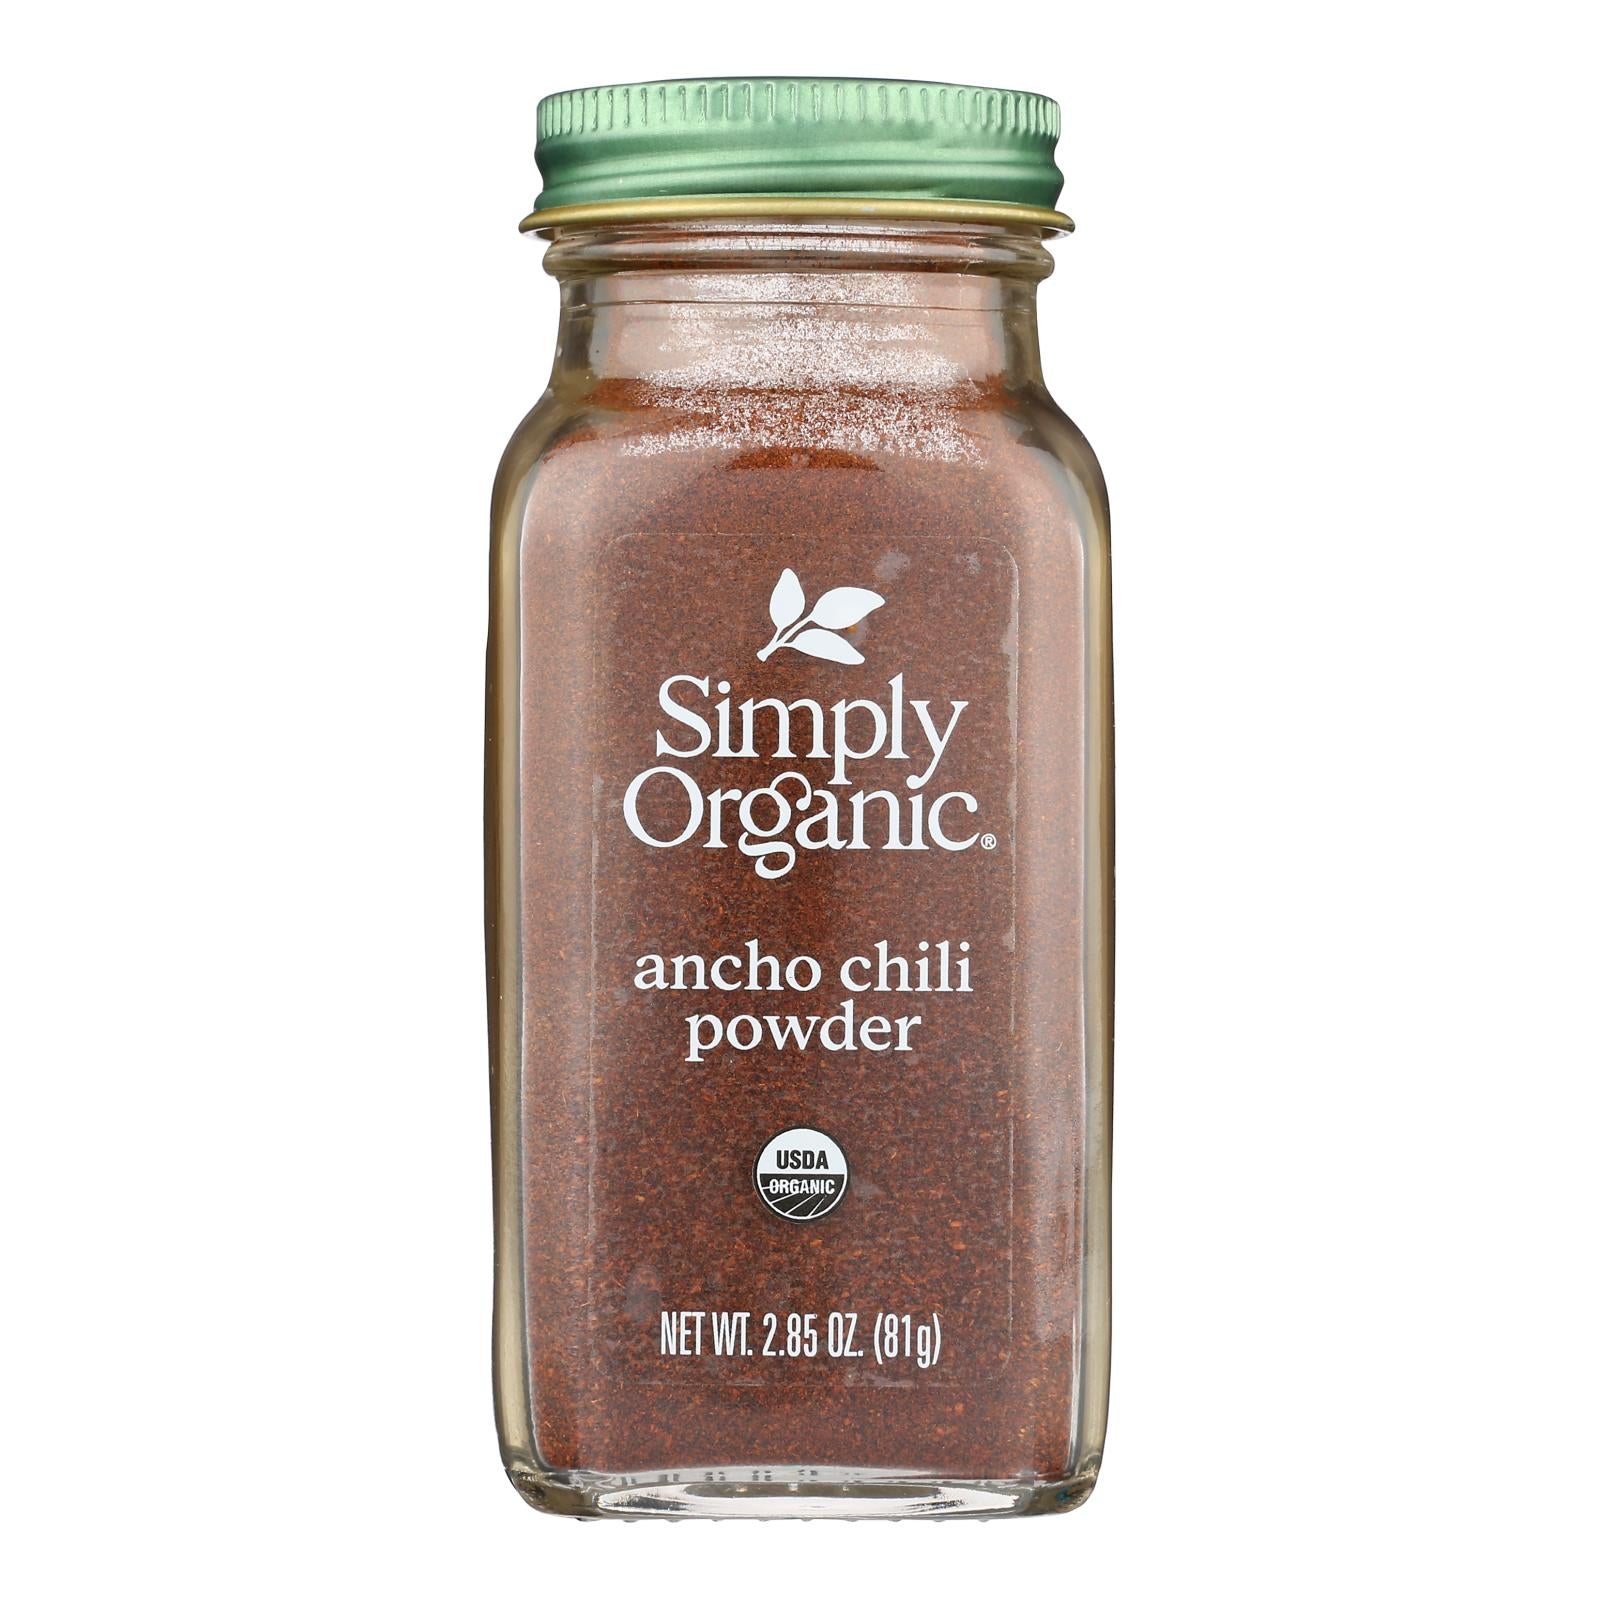 Organic Ancho Chili Powder From Simply Organic  - Case of 6 - 2.85 OZ